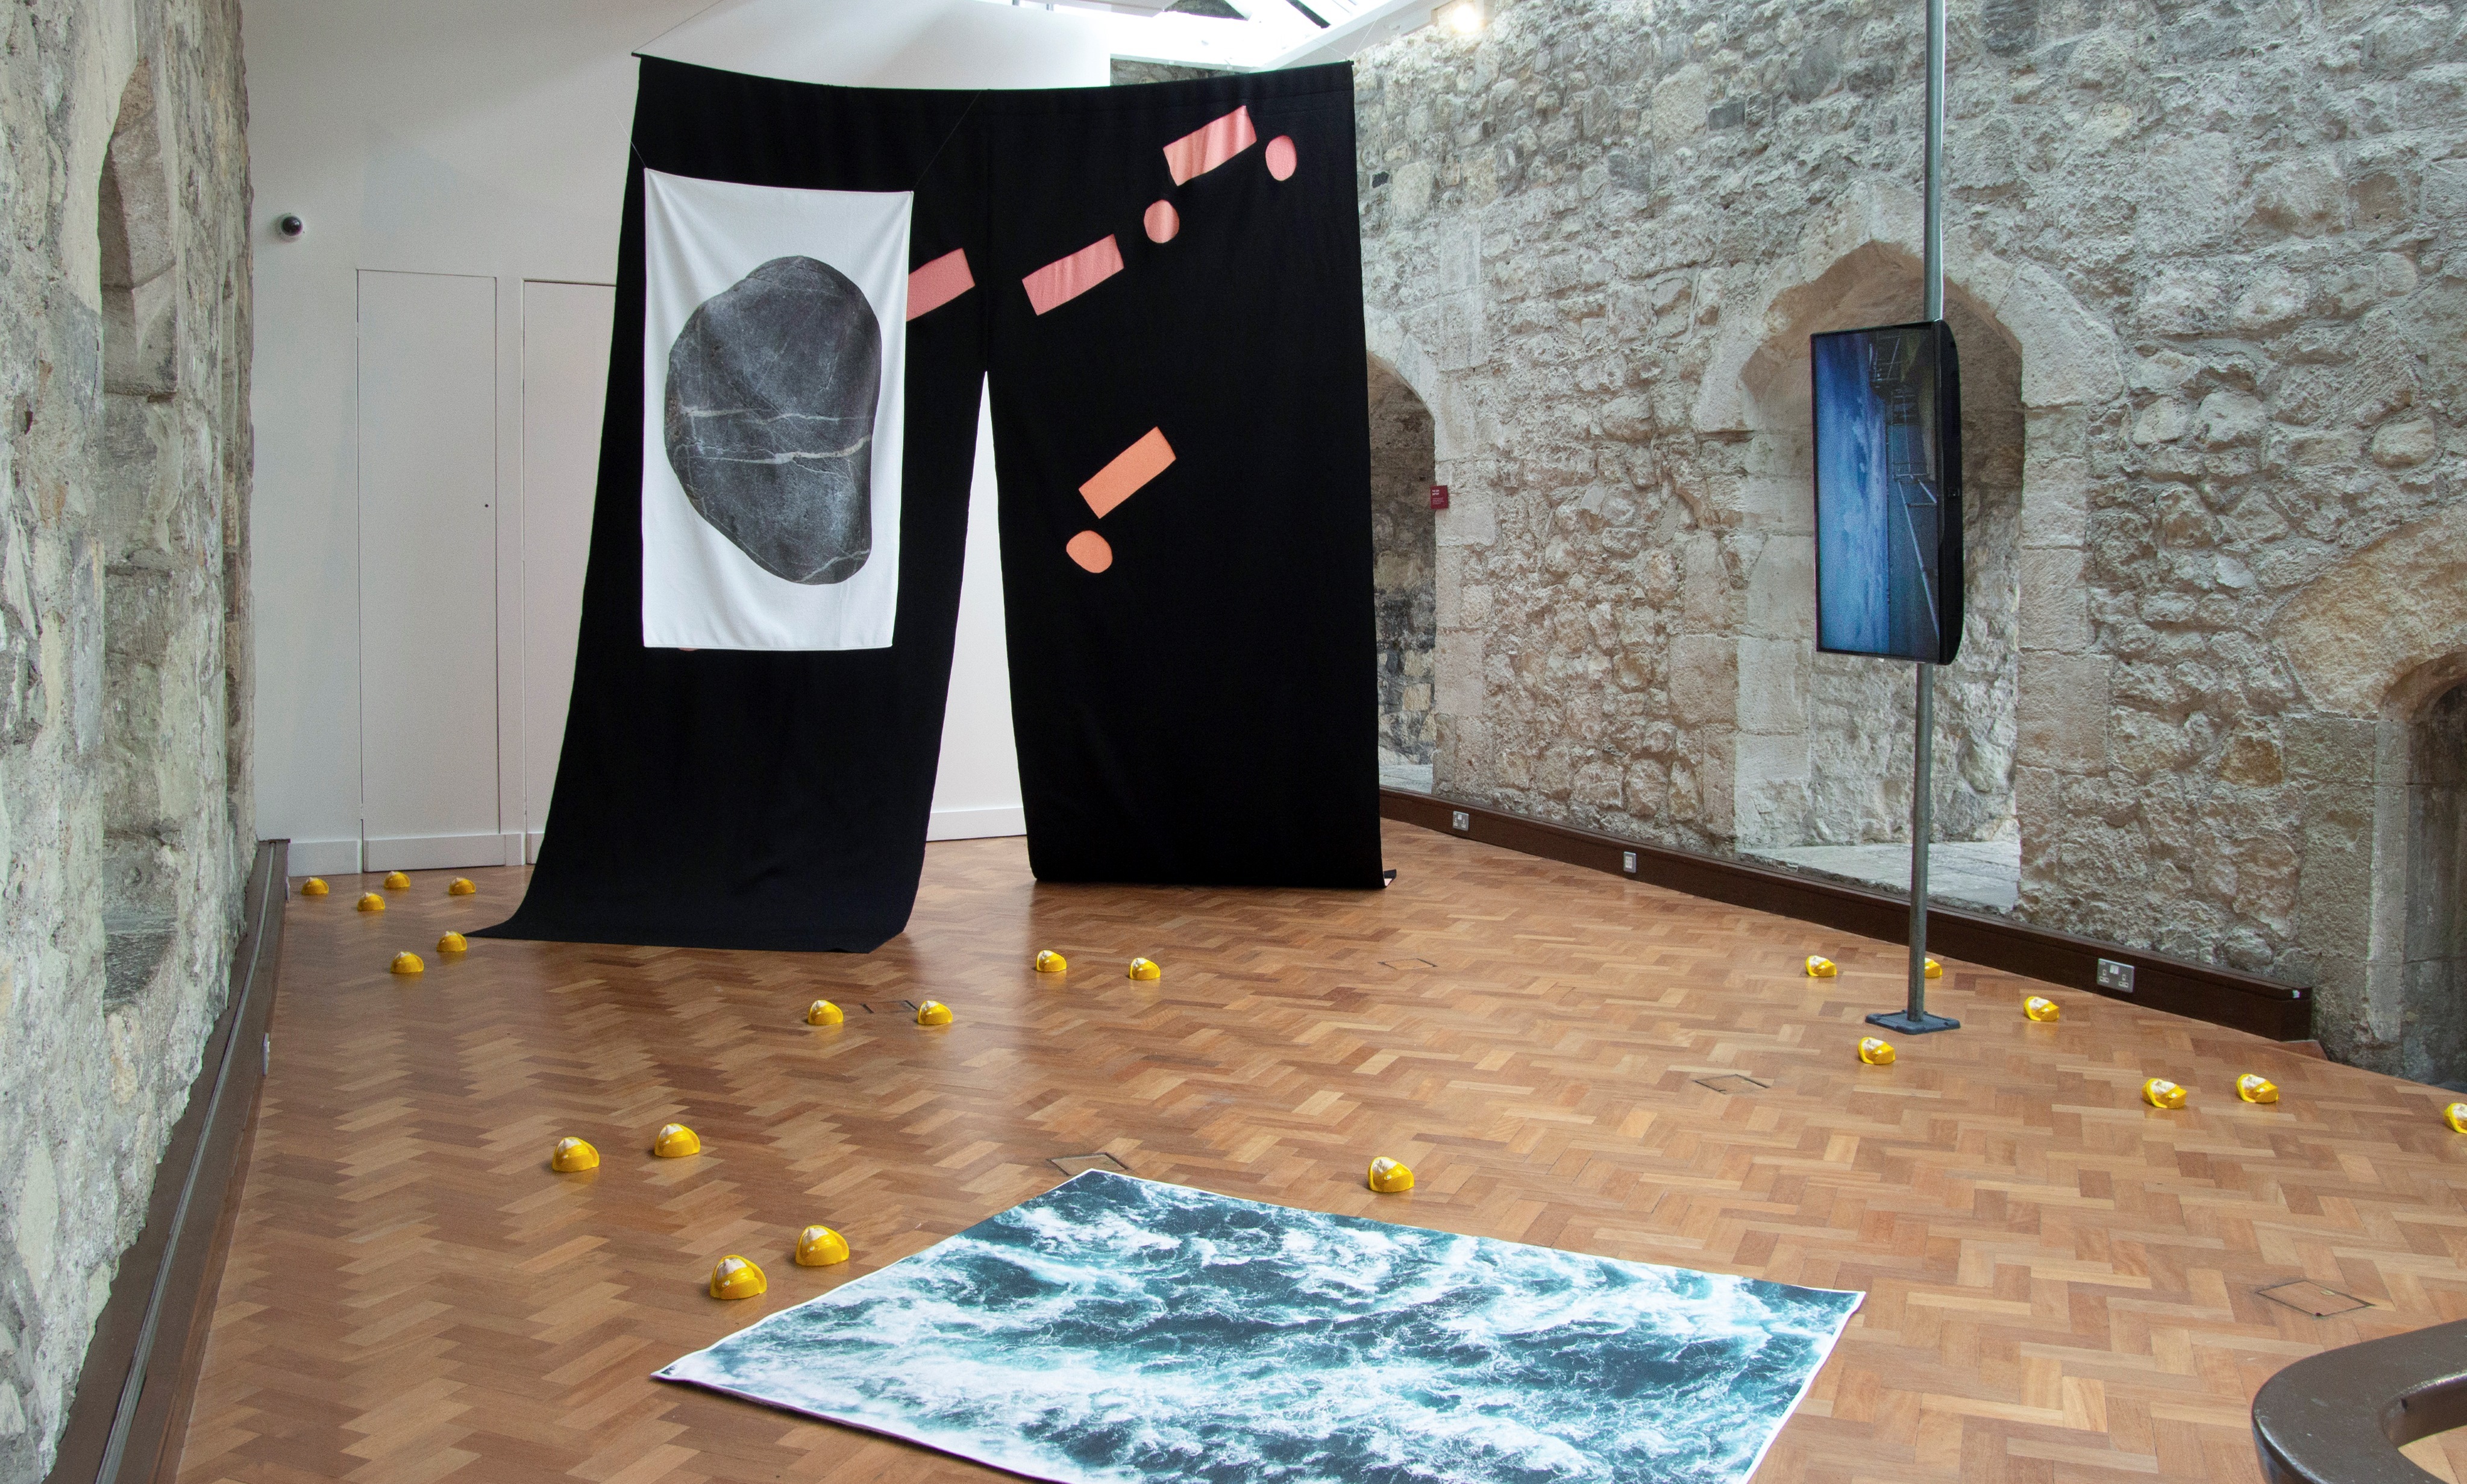 A gallery space with stone walls and windows and a wooden parquet floor. There is artwork installed including a film on a monitor strapped vertically to a metal pole; items scattered on the floor and a large hanging fabric work with a slit in the middle